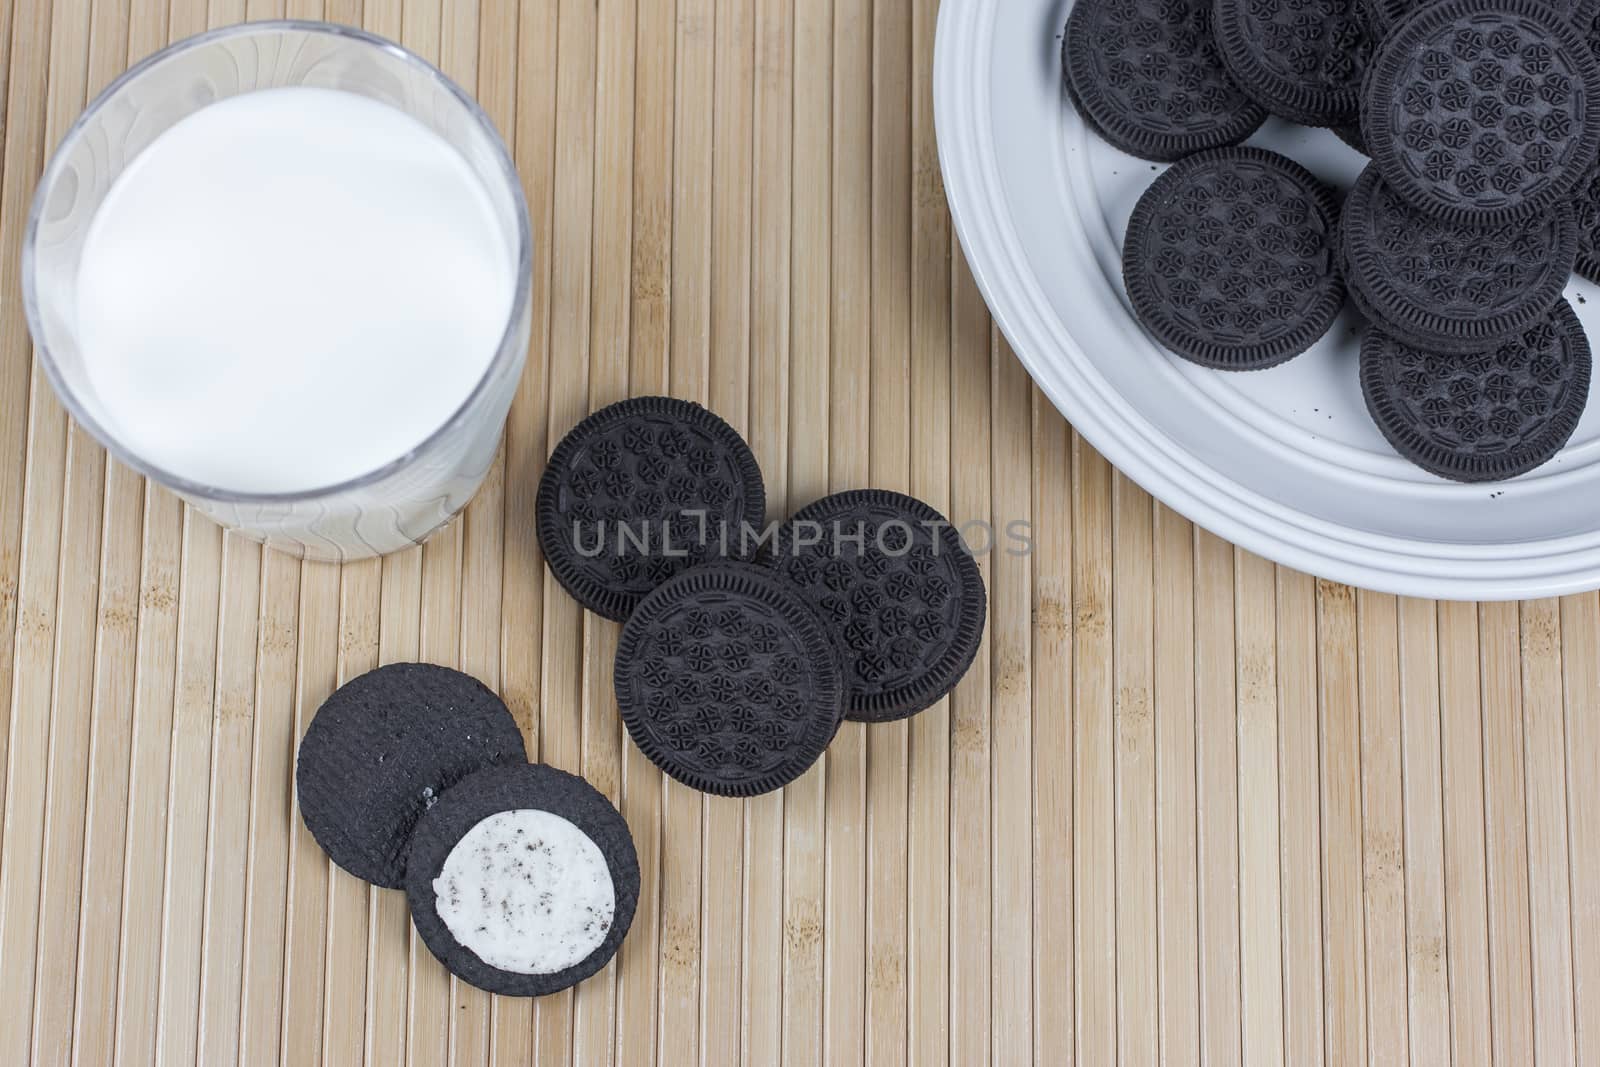 Chcoclate Sandwich Cookies and Milk by SouthernLightStudios